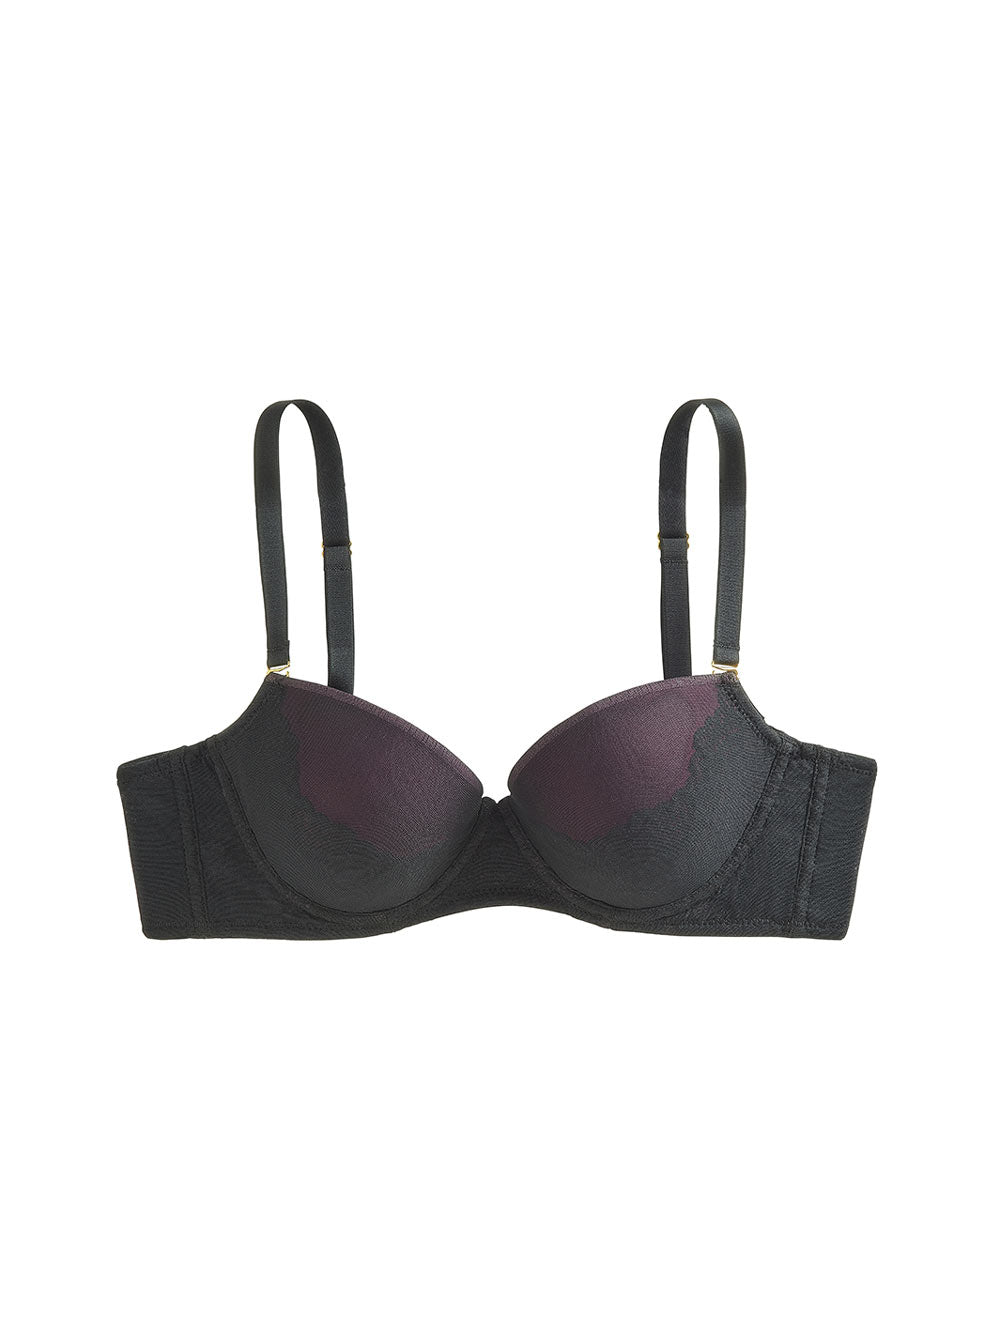 Jeanne Bra, Petite, Demi-cup, Push-up, Removable padding, Smooth Cup